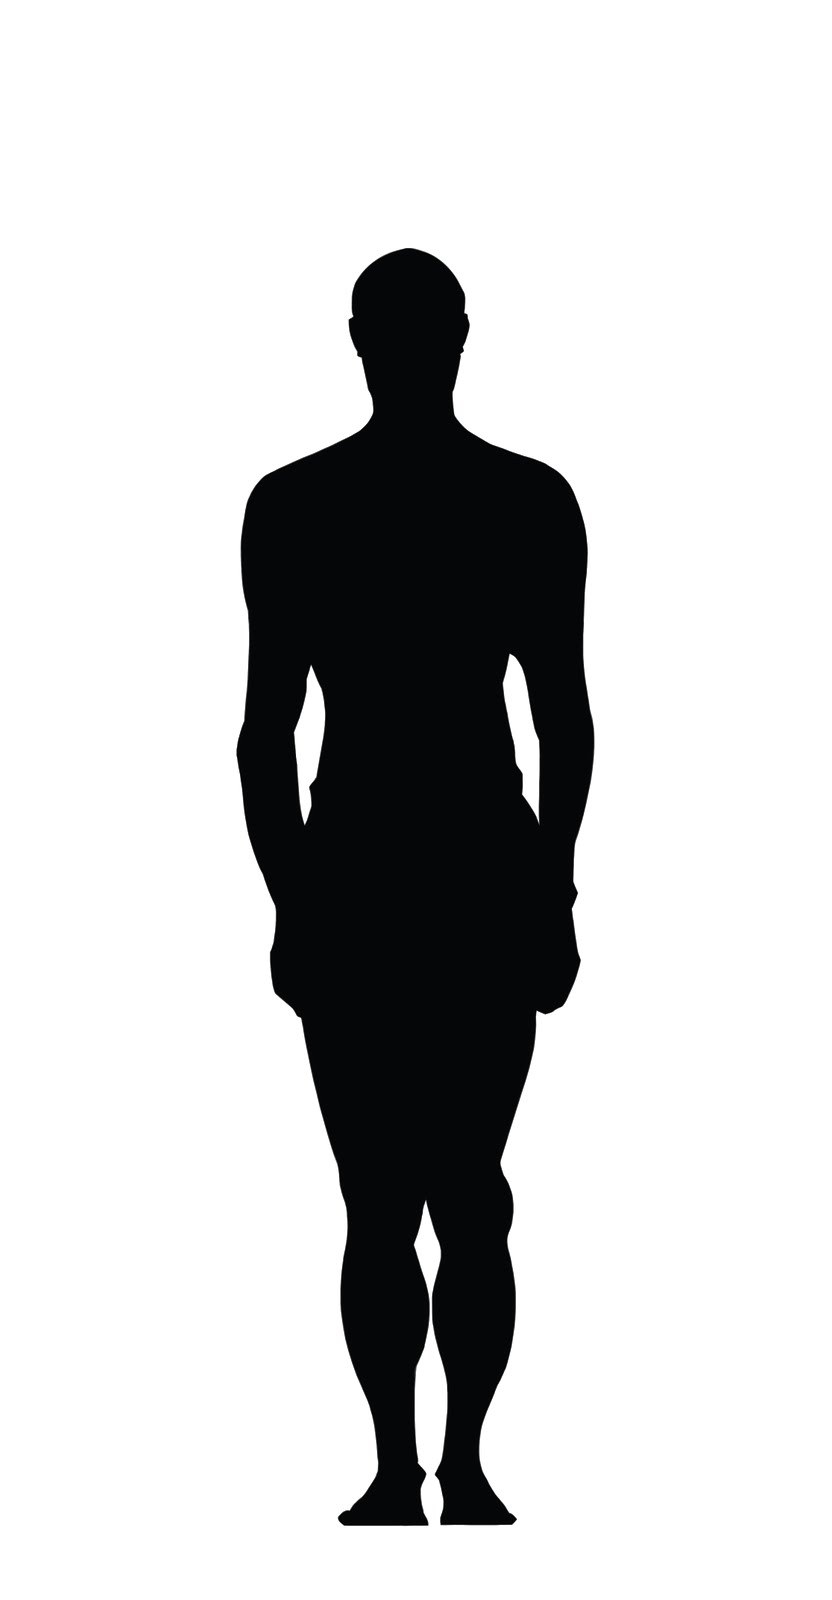 Human Body Silhouette   Clipart Best